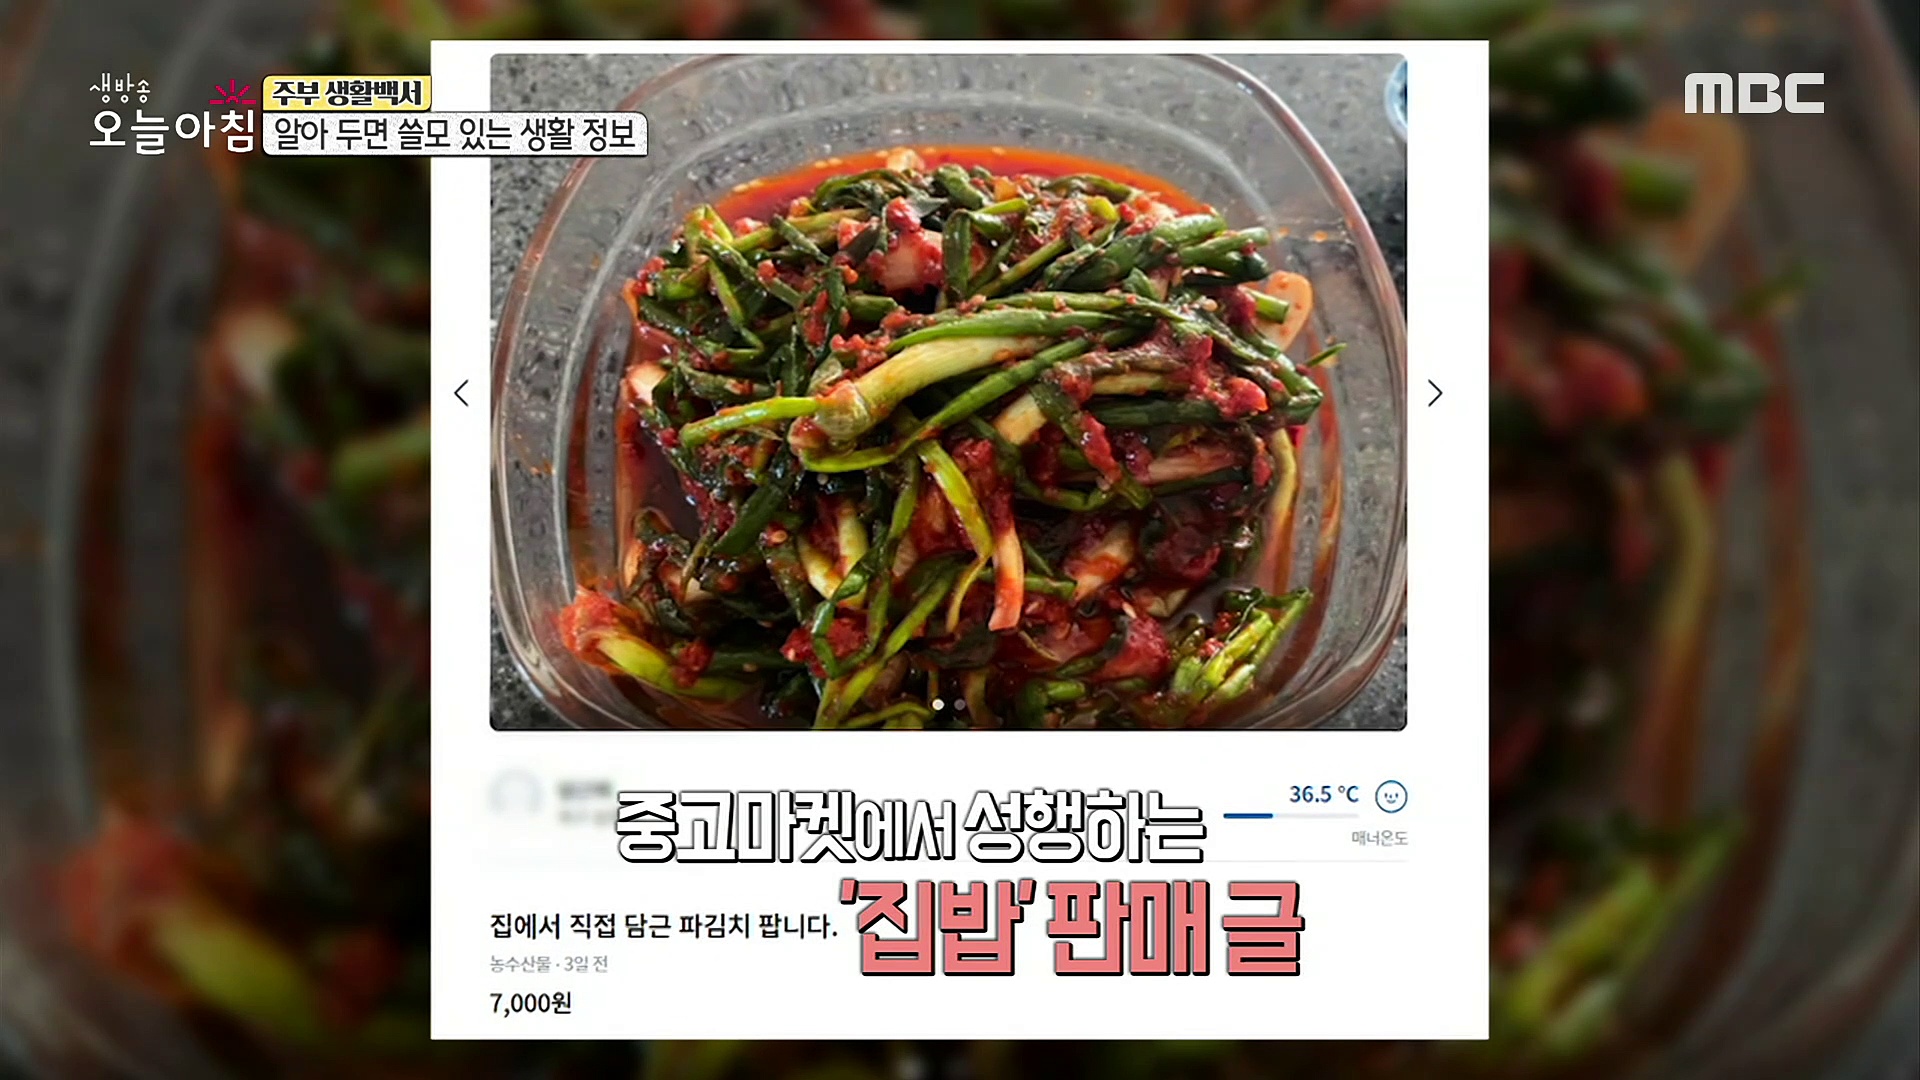 [LIVING] Is it illegal to sell food on used trading sites, 생방송 오늘 아침 20201217